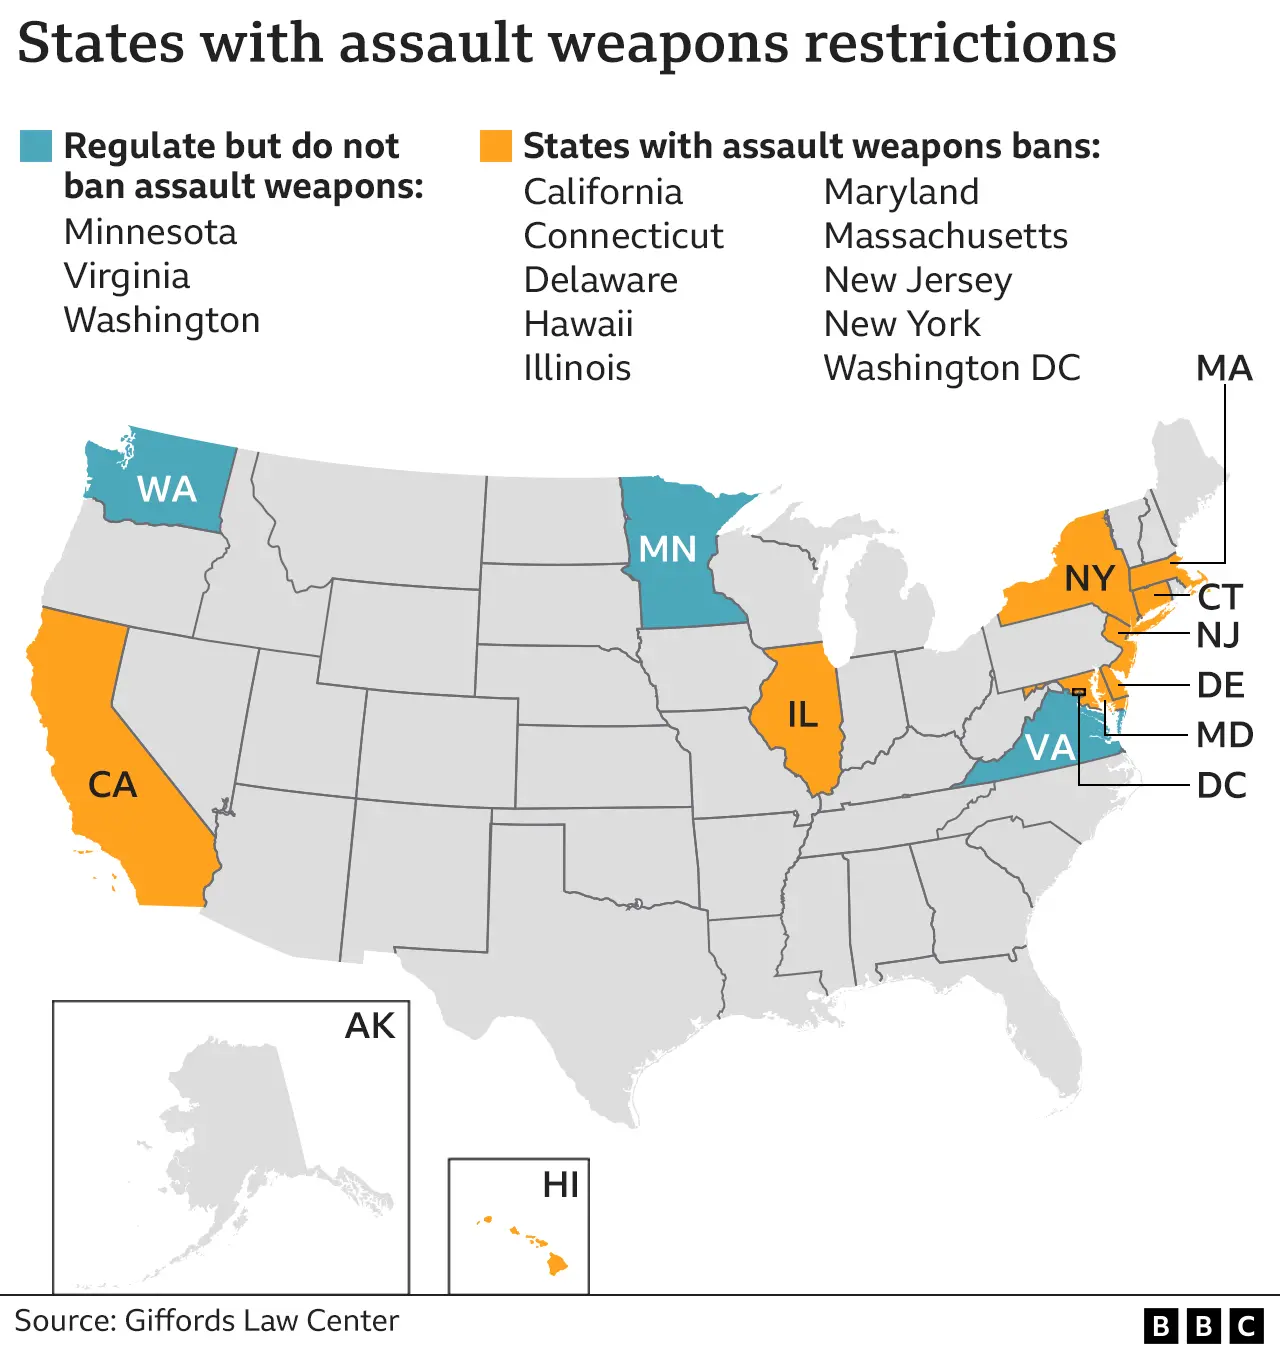 _129174804_states_with_assault_weapon_restrictions_640-nc-2x-nc.png.webp